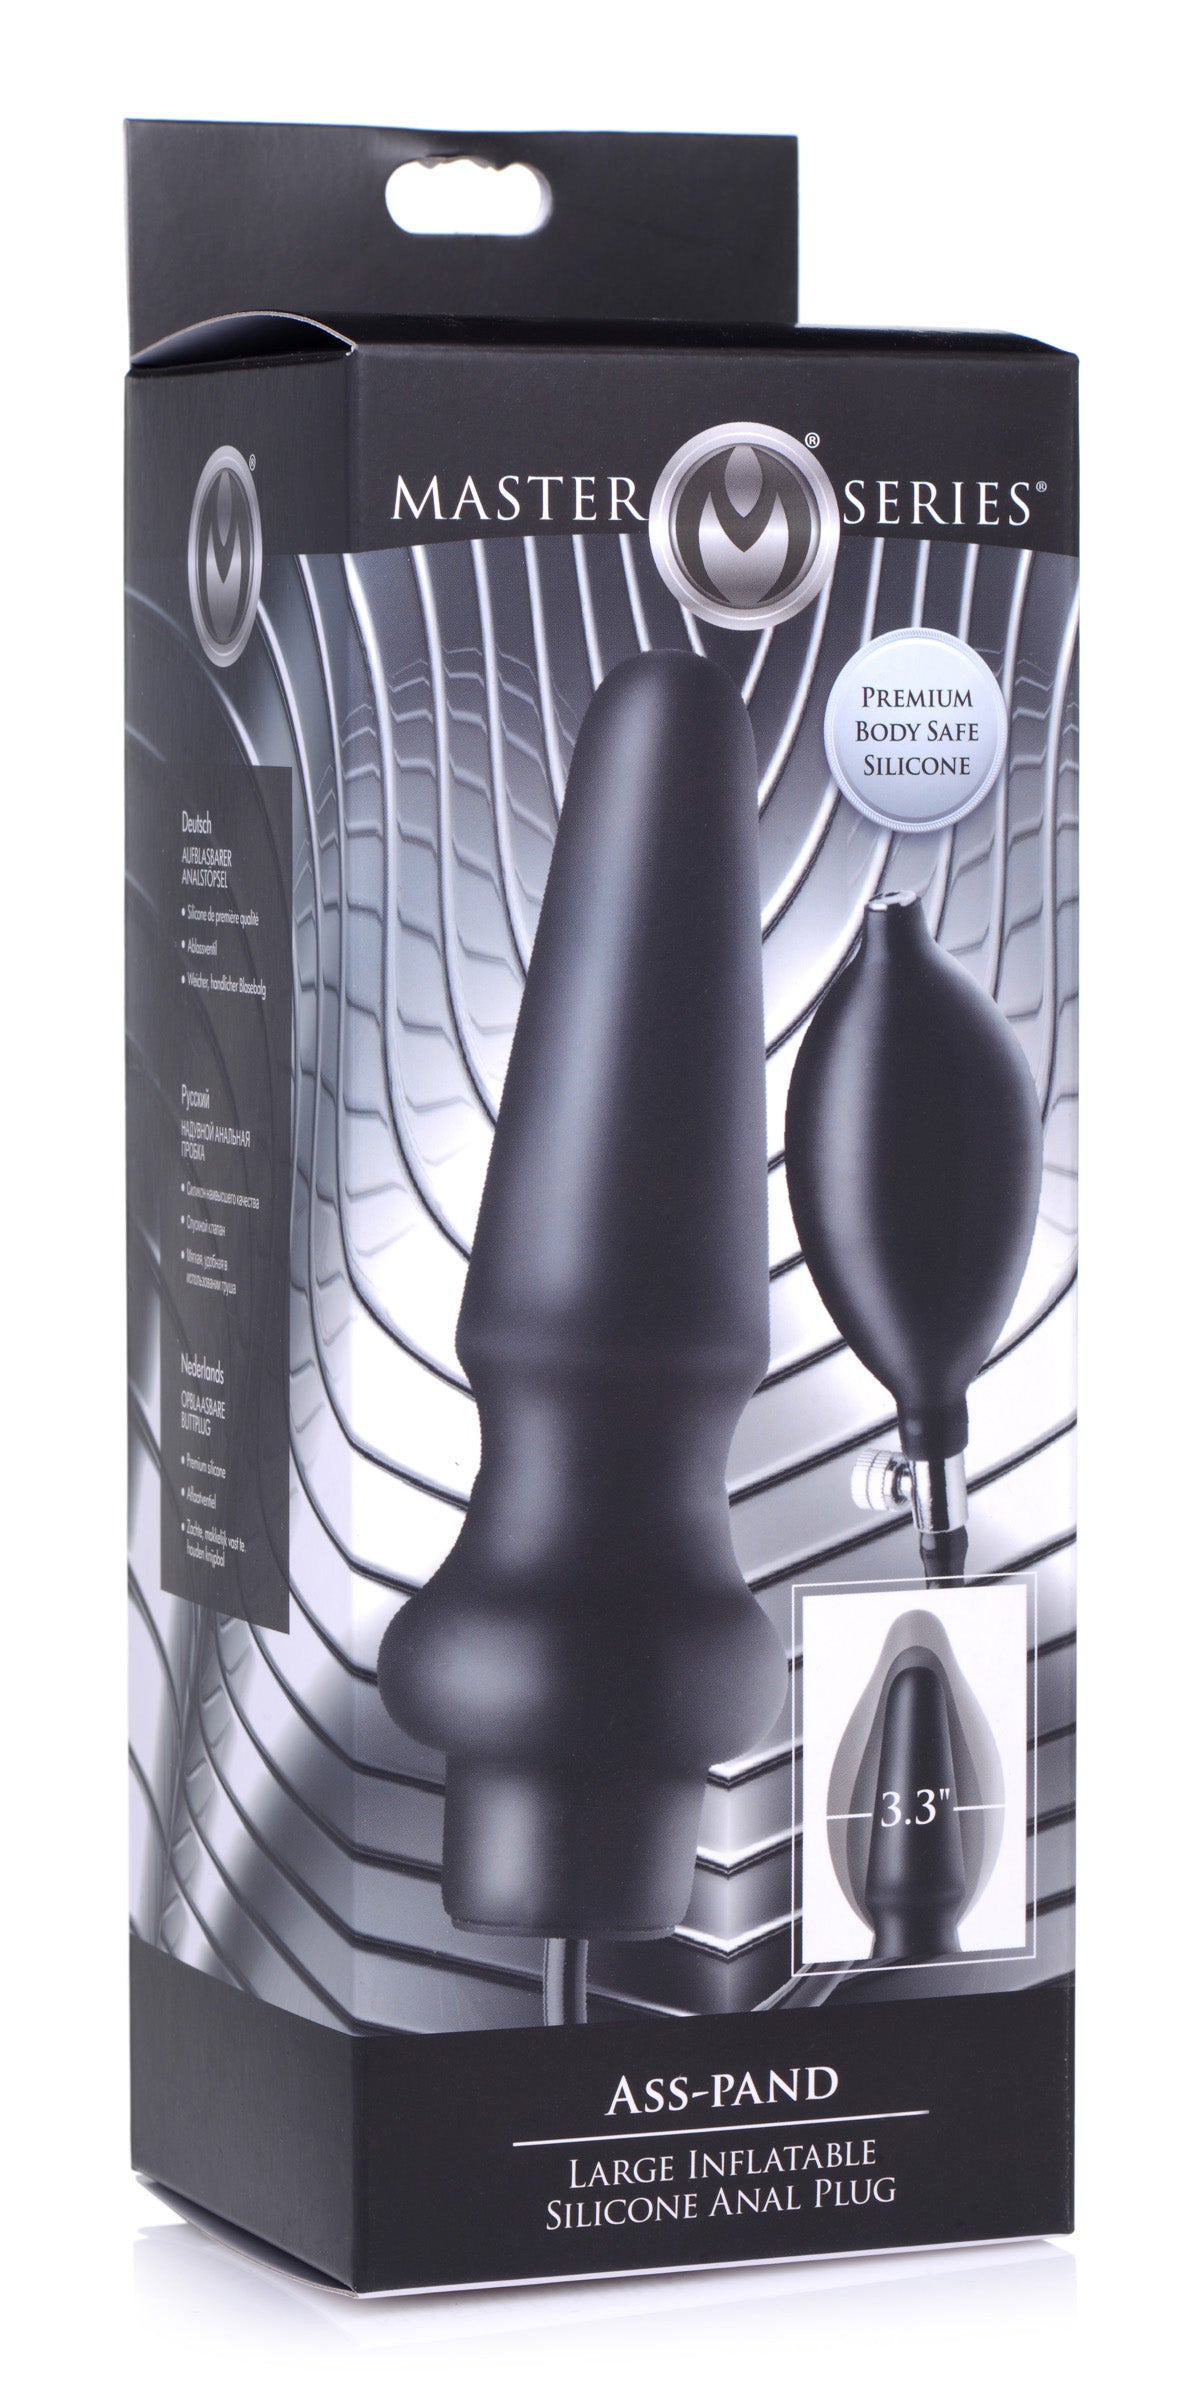 Ass-pand Large Inflatable Silicone Anal Plug